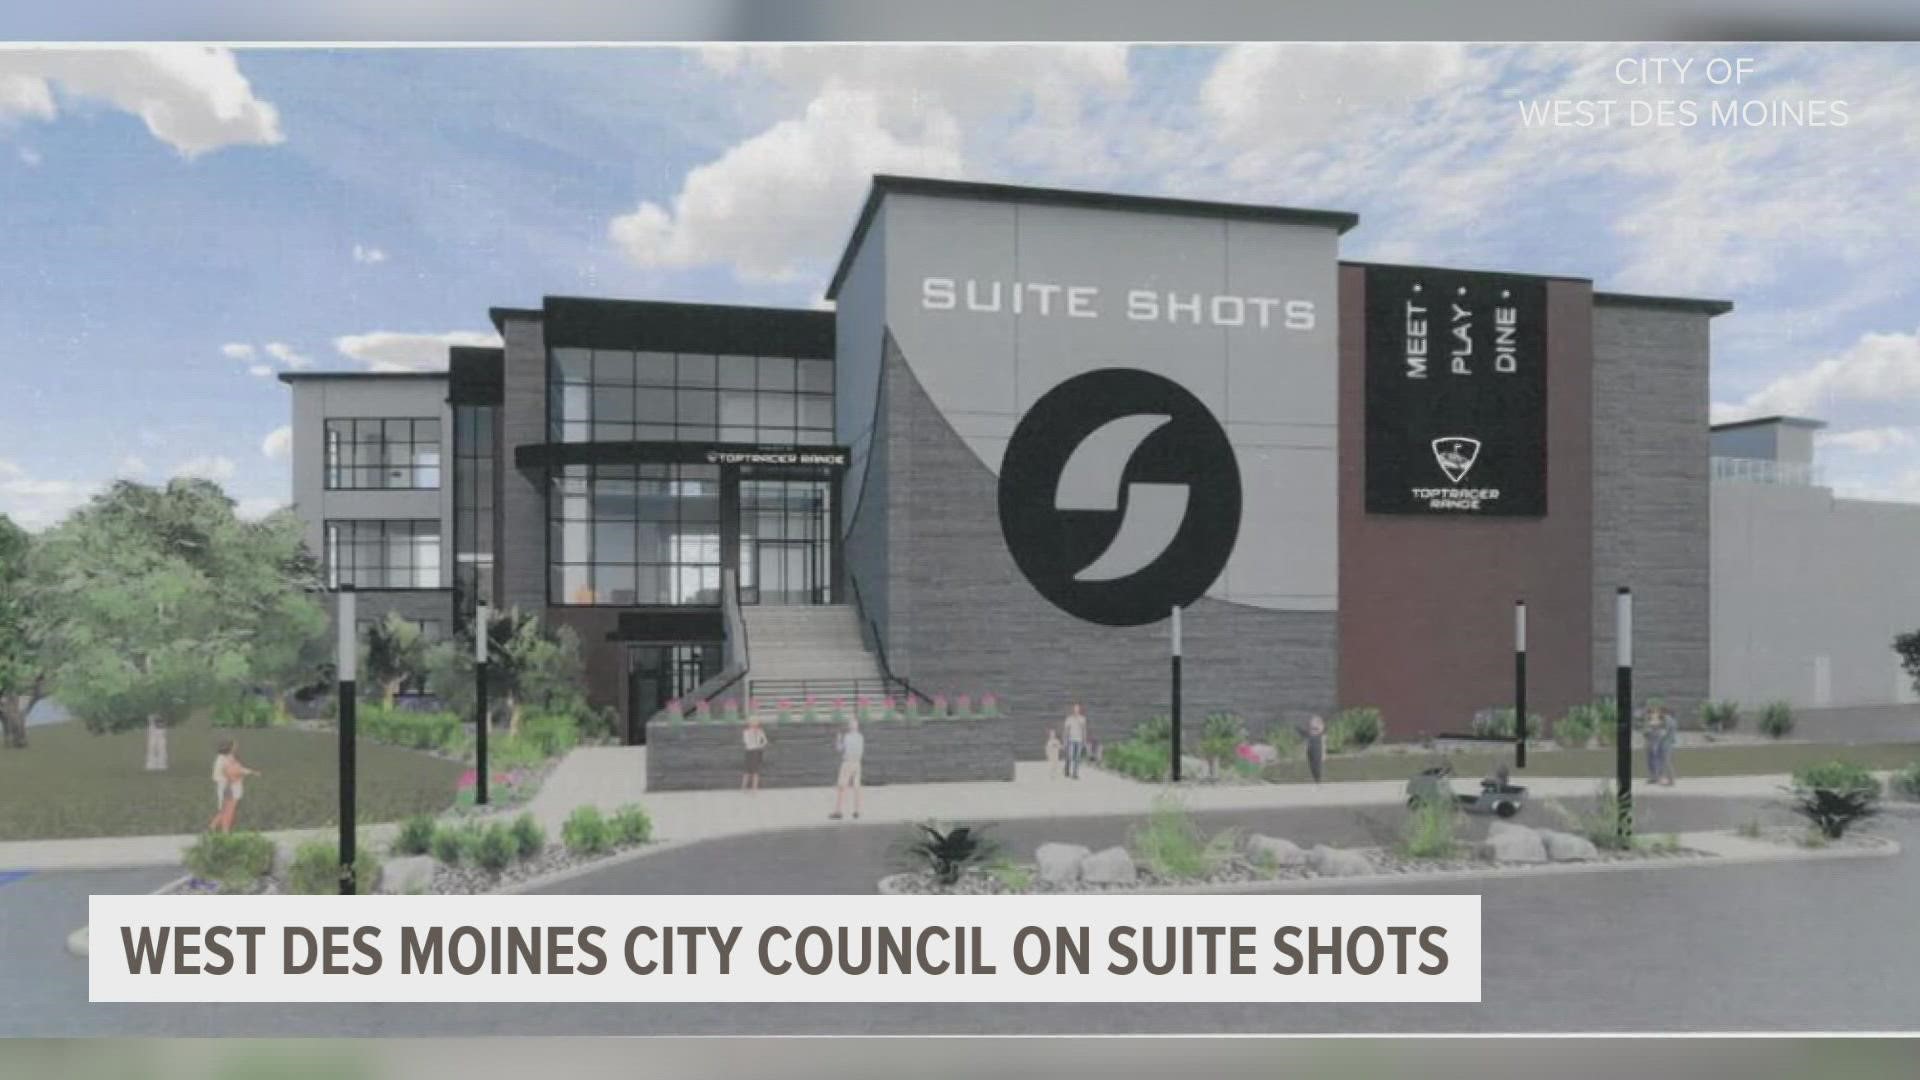 The West Des Moines City Council voted to move forward with development plans to build a Suite Shot golf facility near Eye 35 and Grand Avenue.